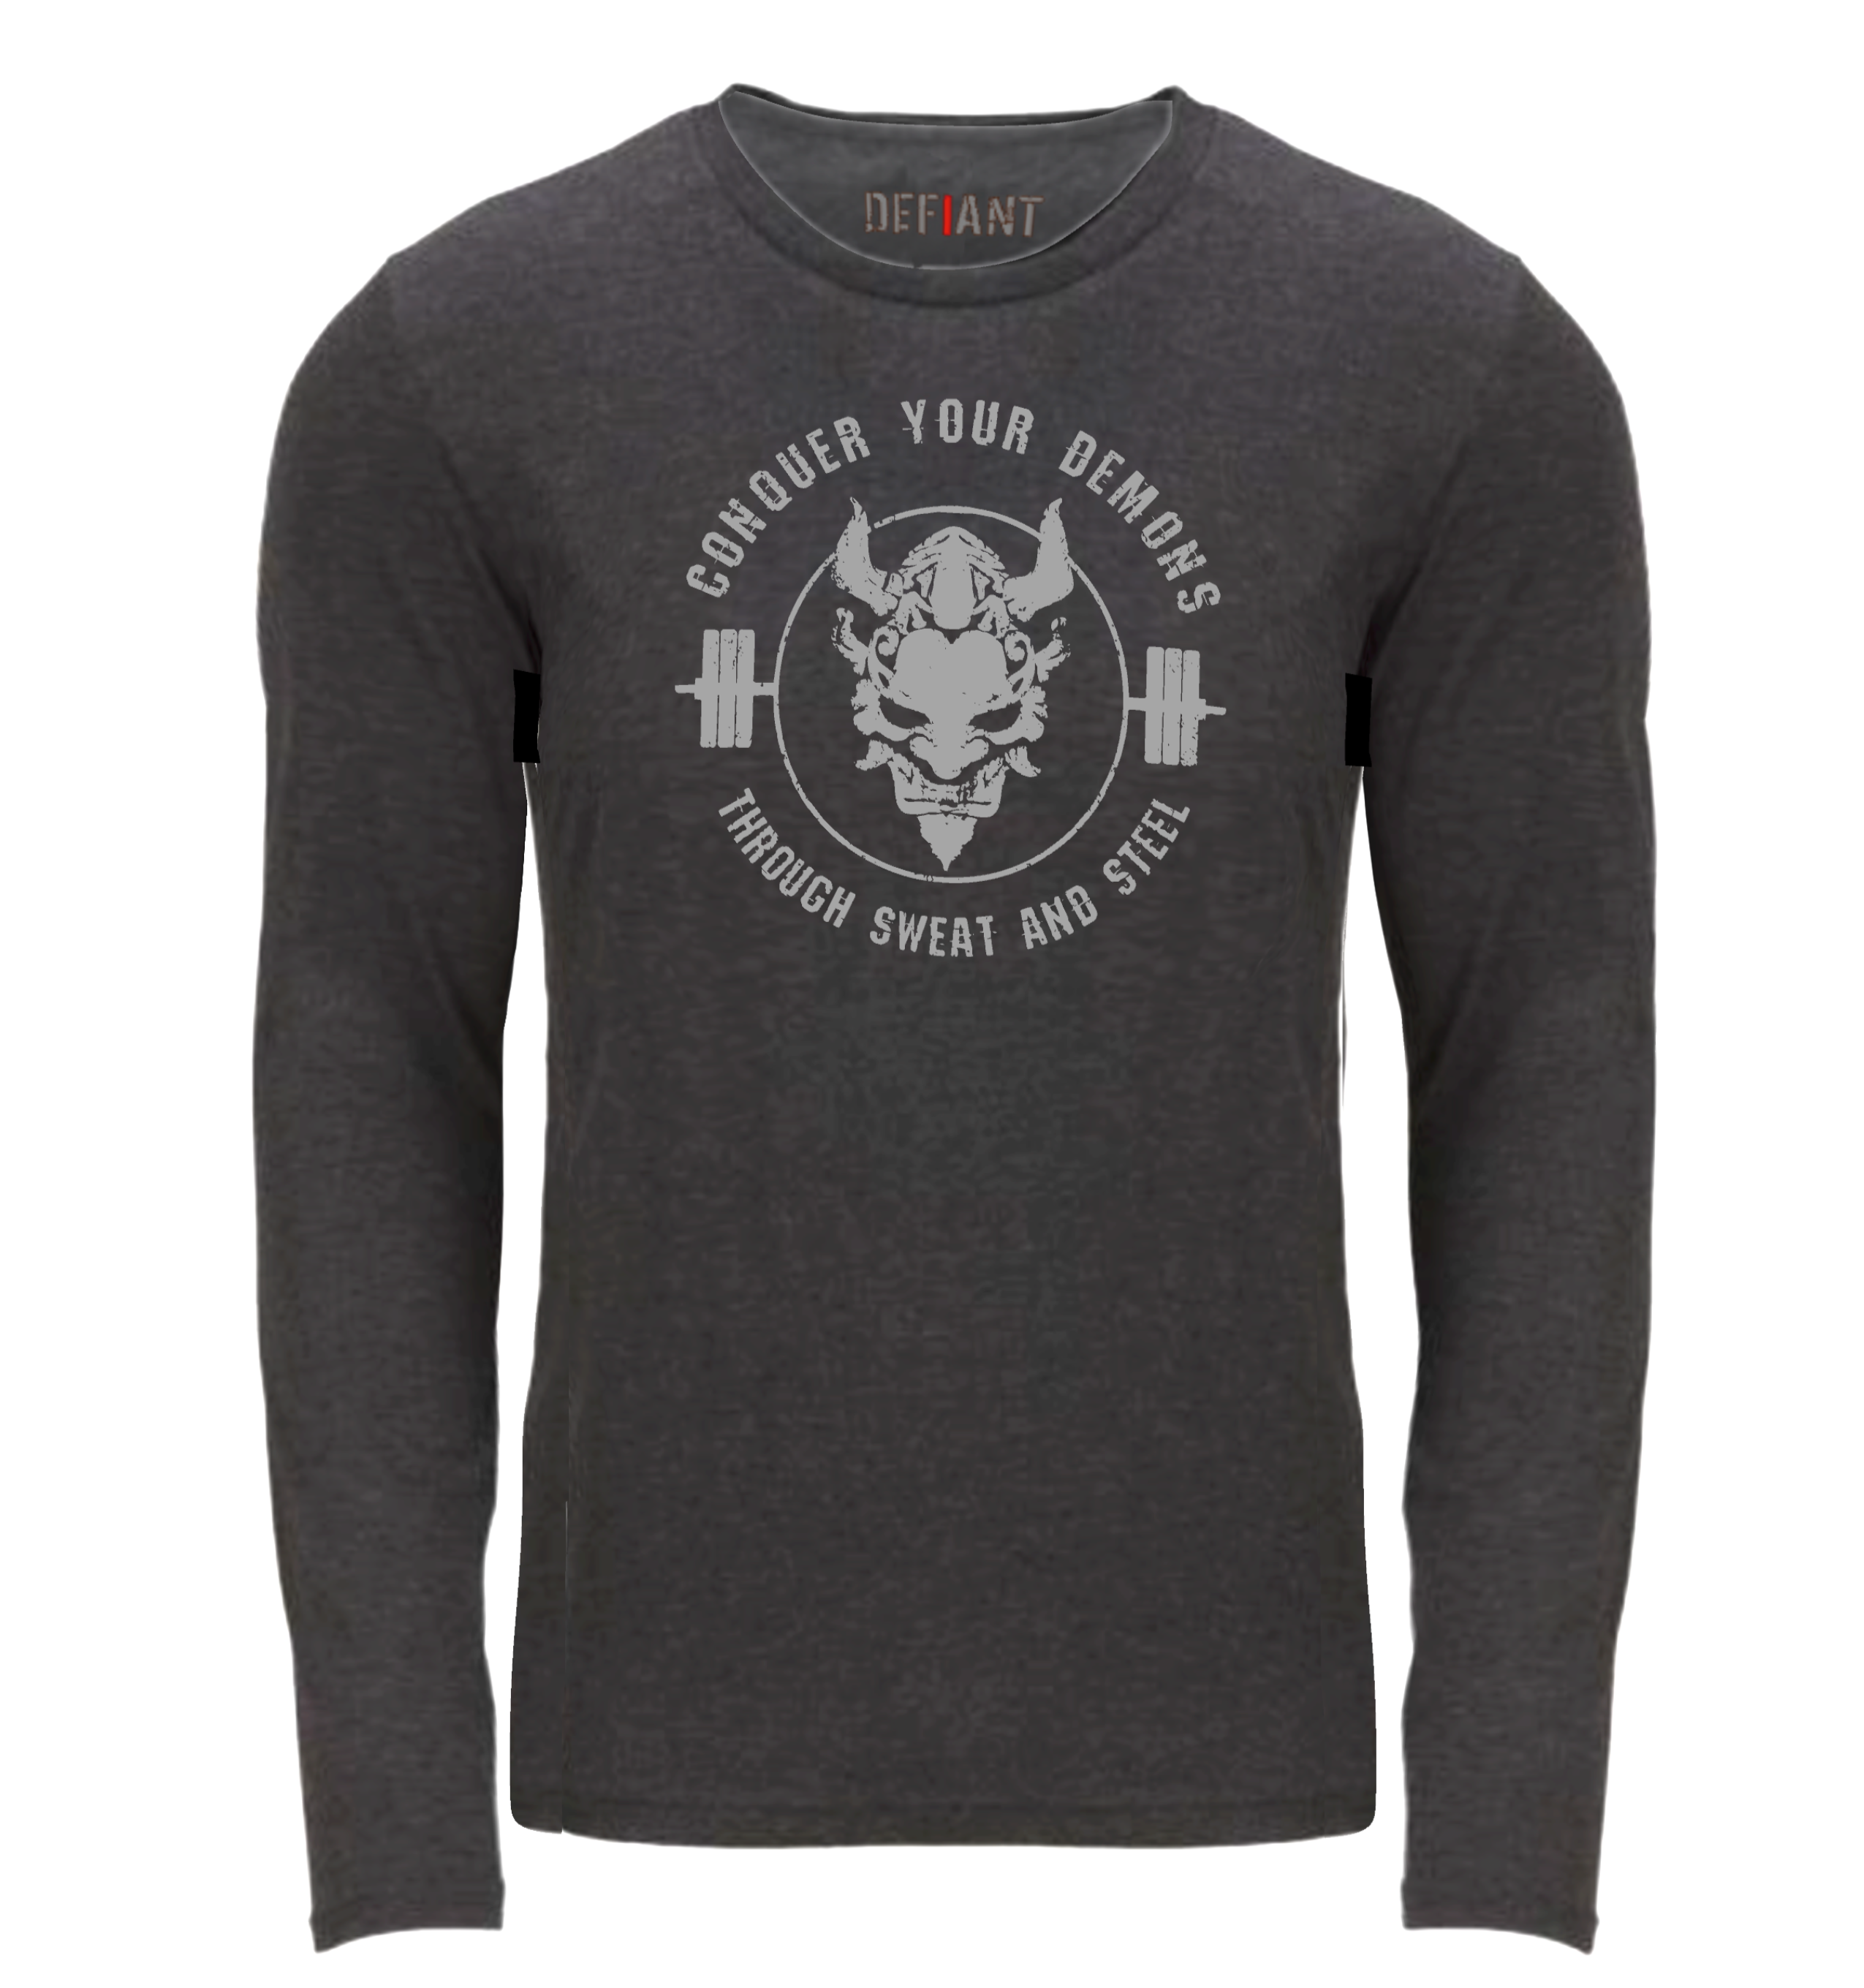 CONQUER YOUR DEMONS - LONG SLEEVE T - ANTIQUE BLACK - LIMITED RUN!